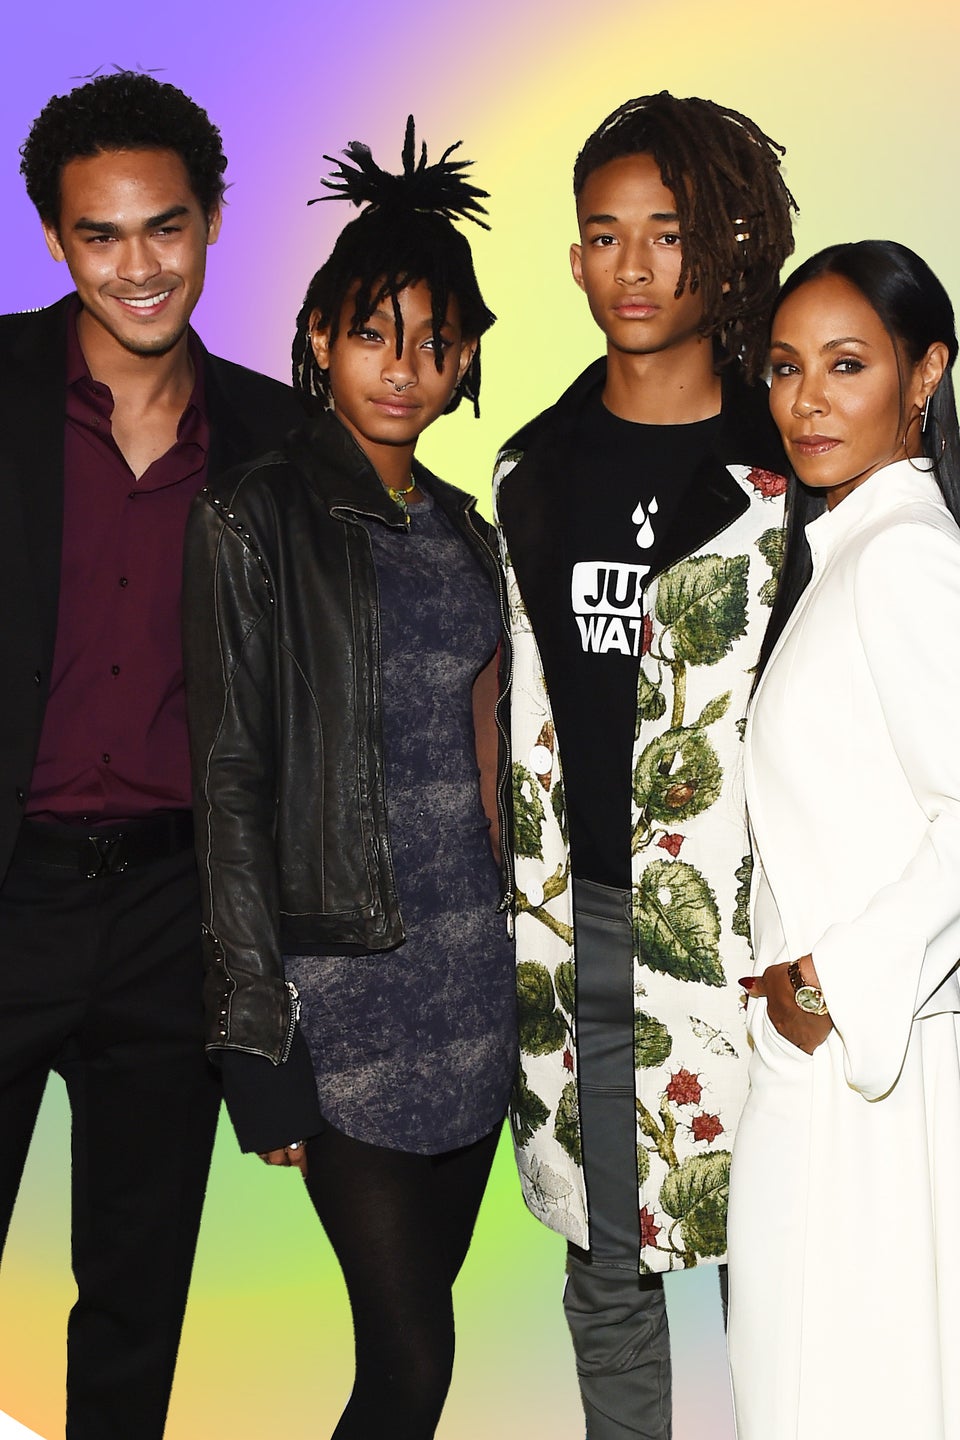 Jada Pinkett Smith Shared An Absolutely Hilarious Throwback Clip Of Her Family At The BET Awards In 2005